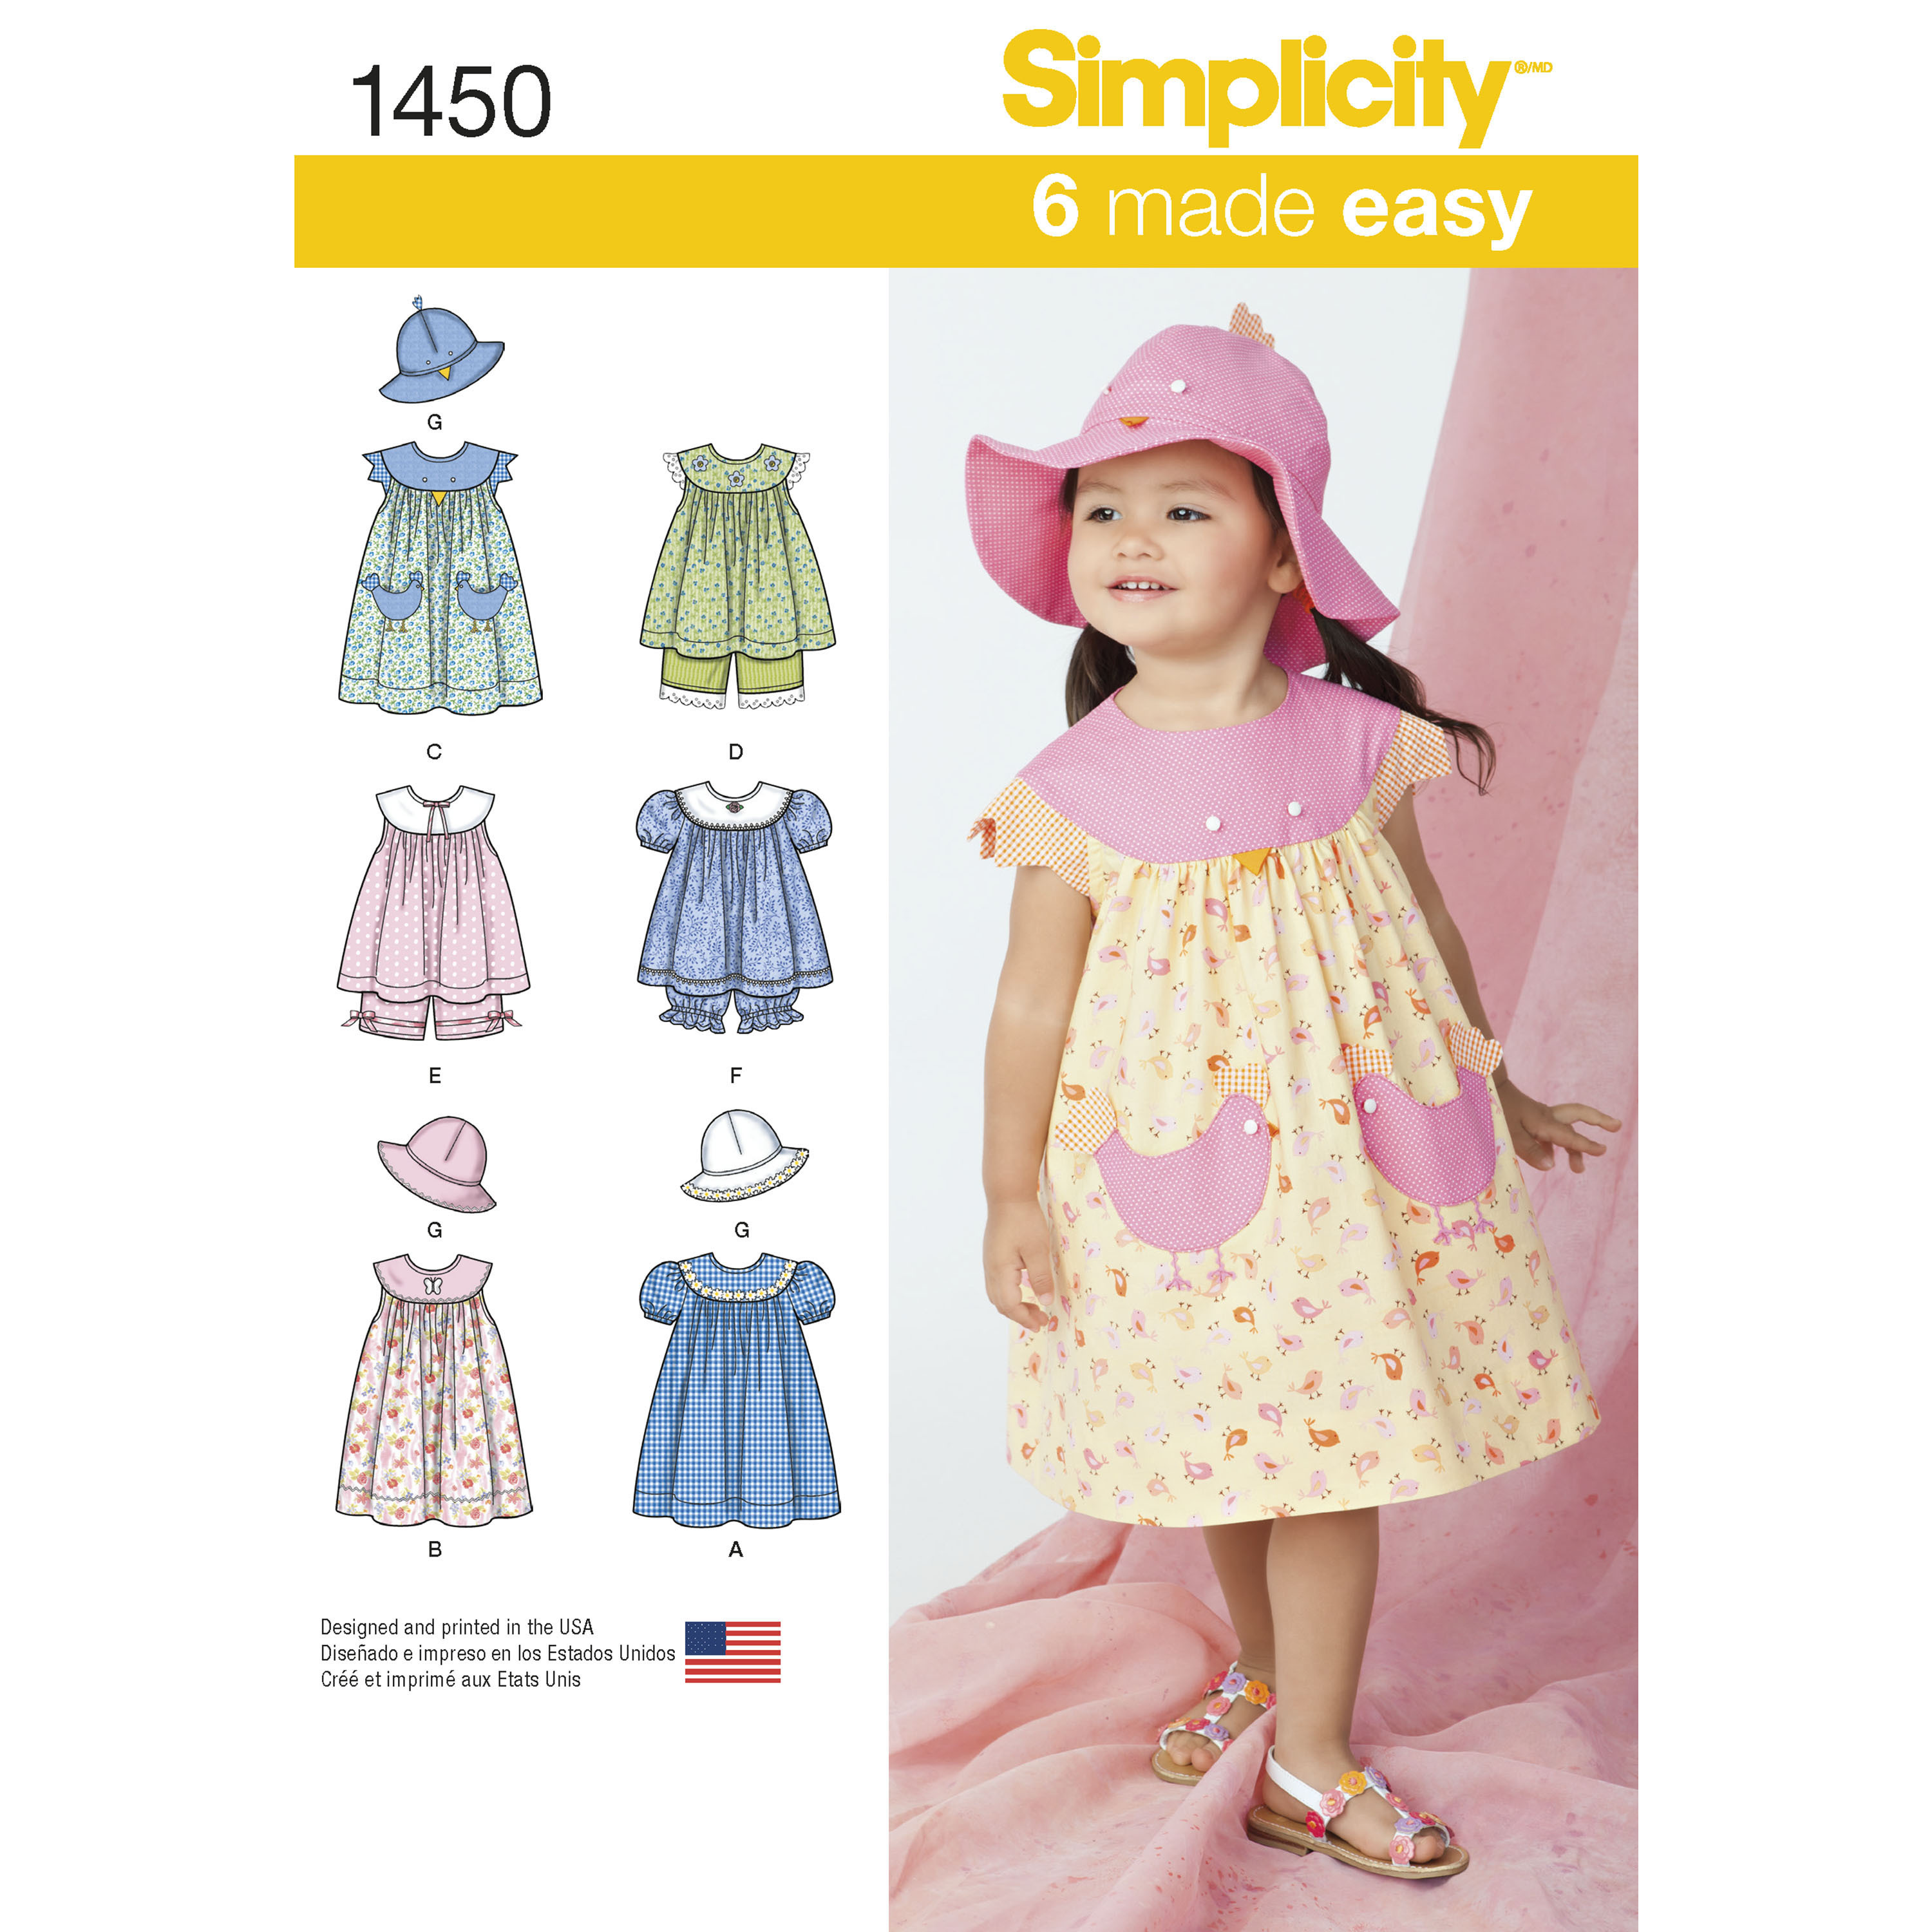 Simplicity Sewing Pattern 1887